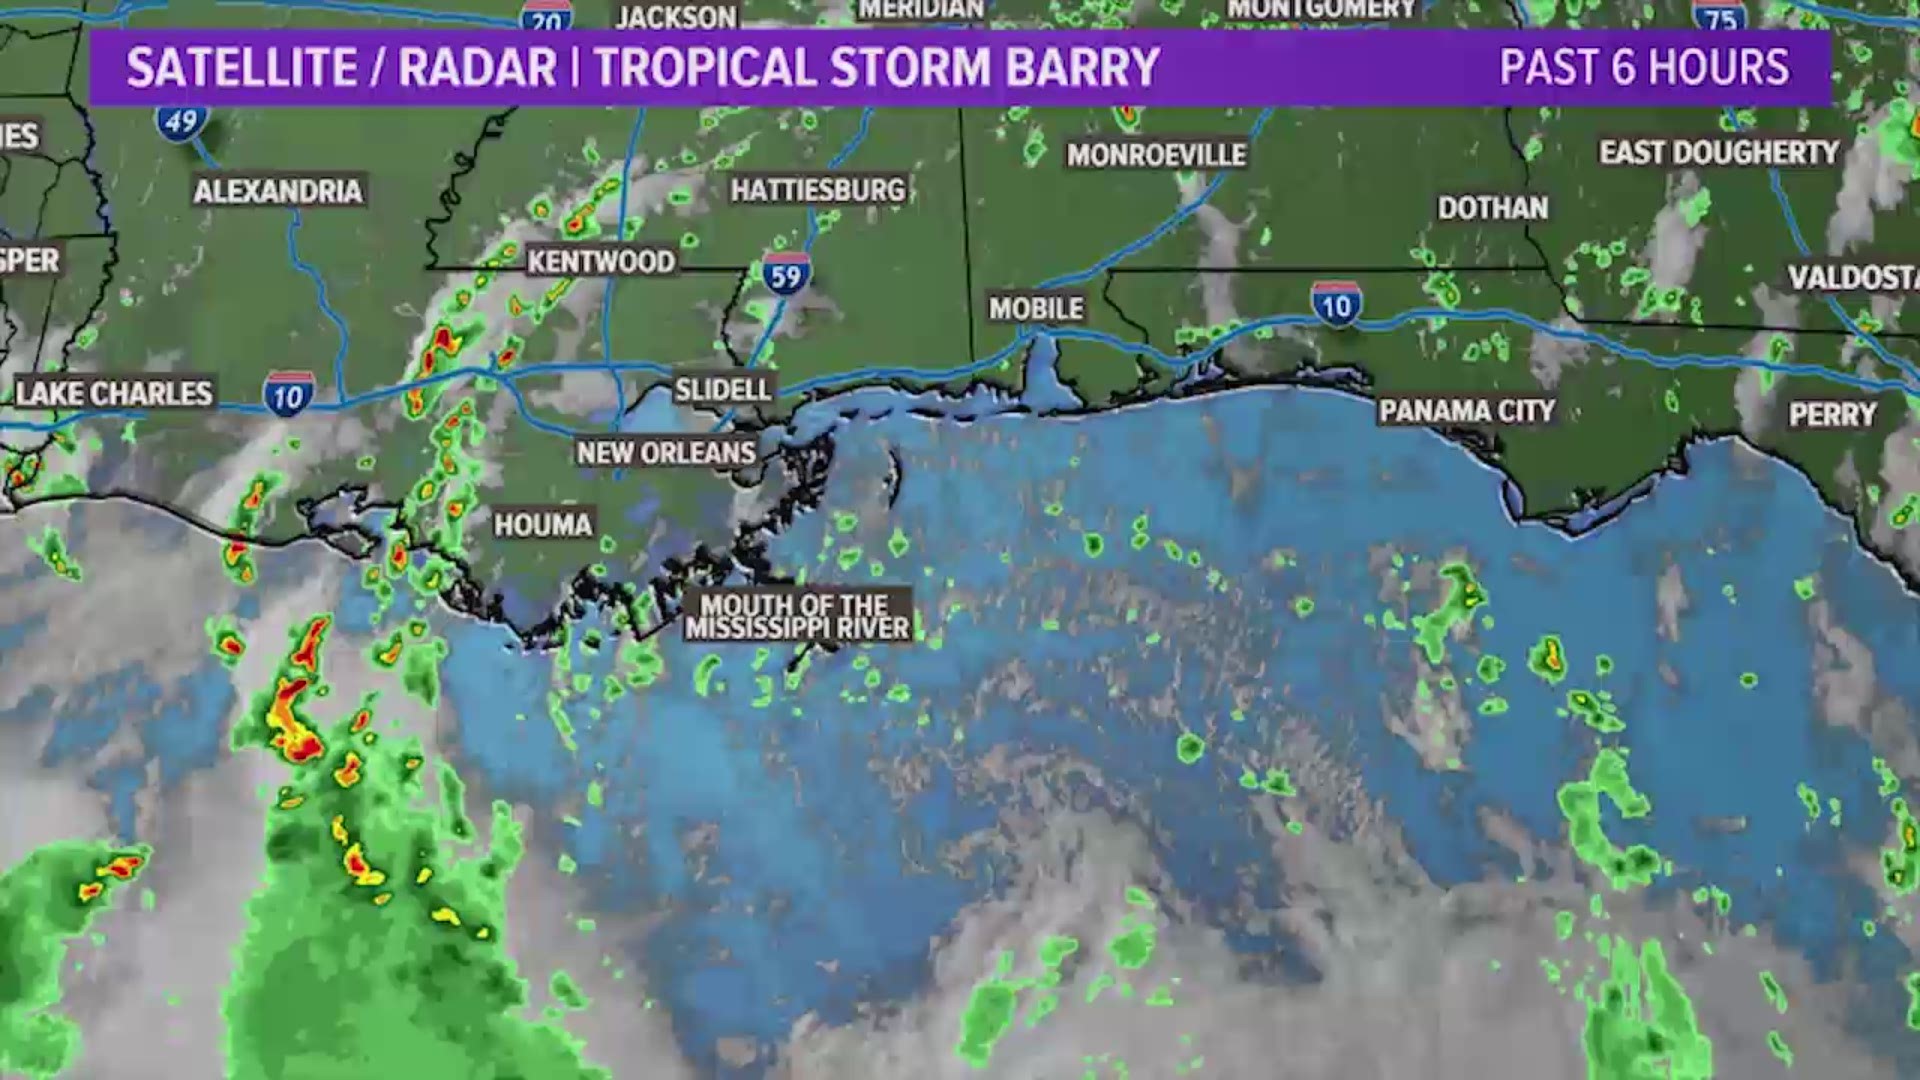 Barry's track, warnings and rainfall